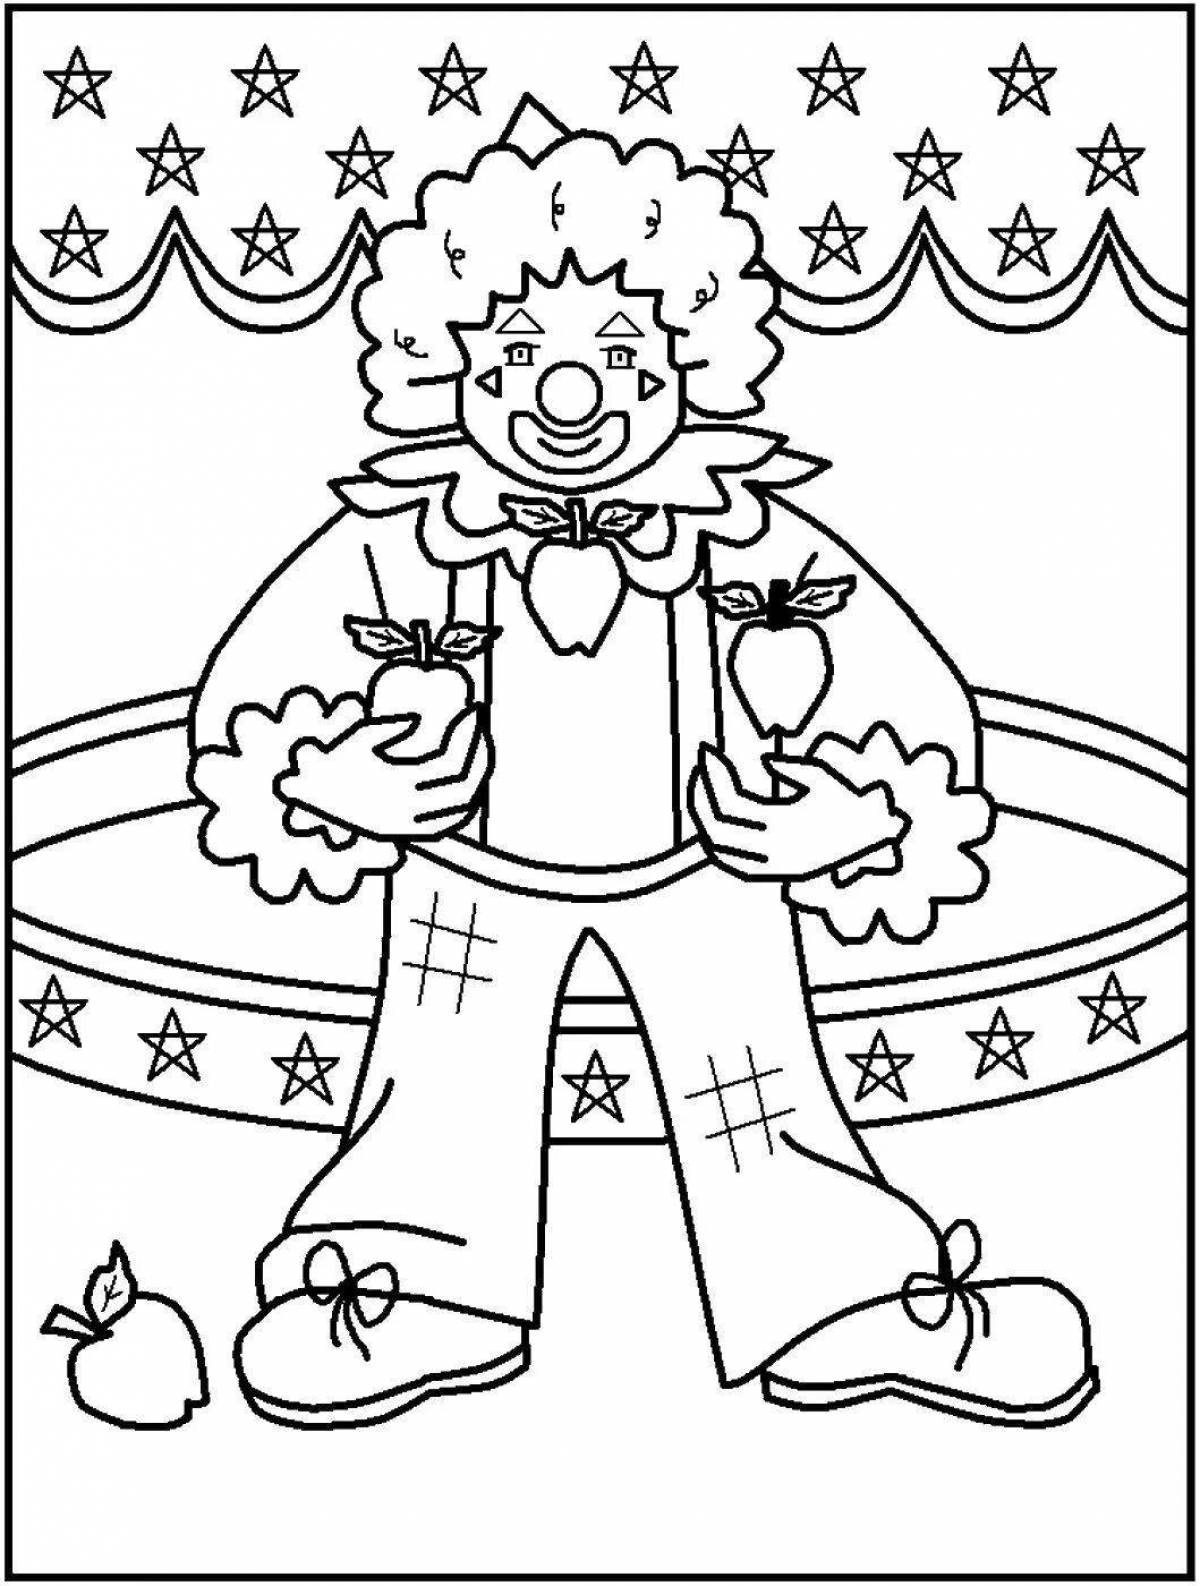 Adorable clown coloring book for 6-7 year olds